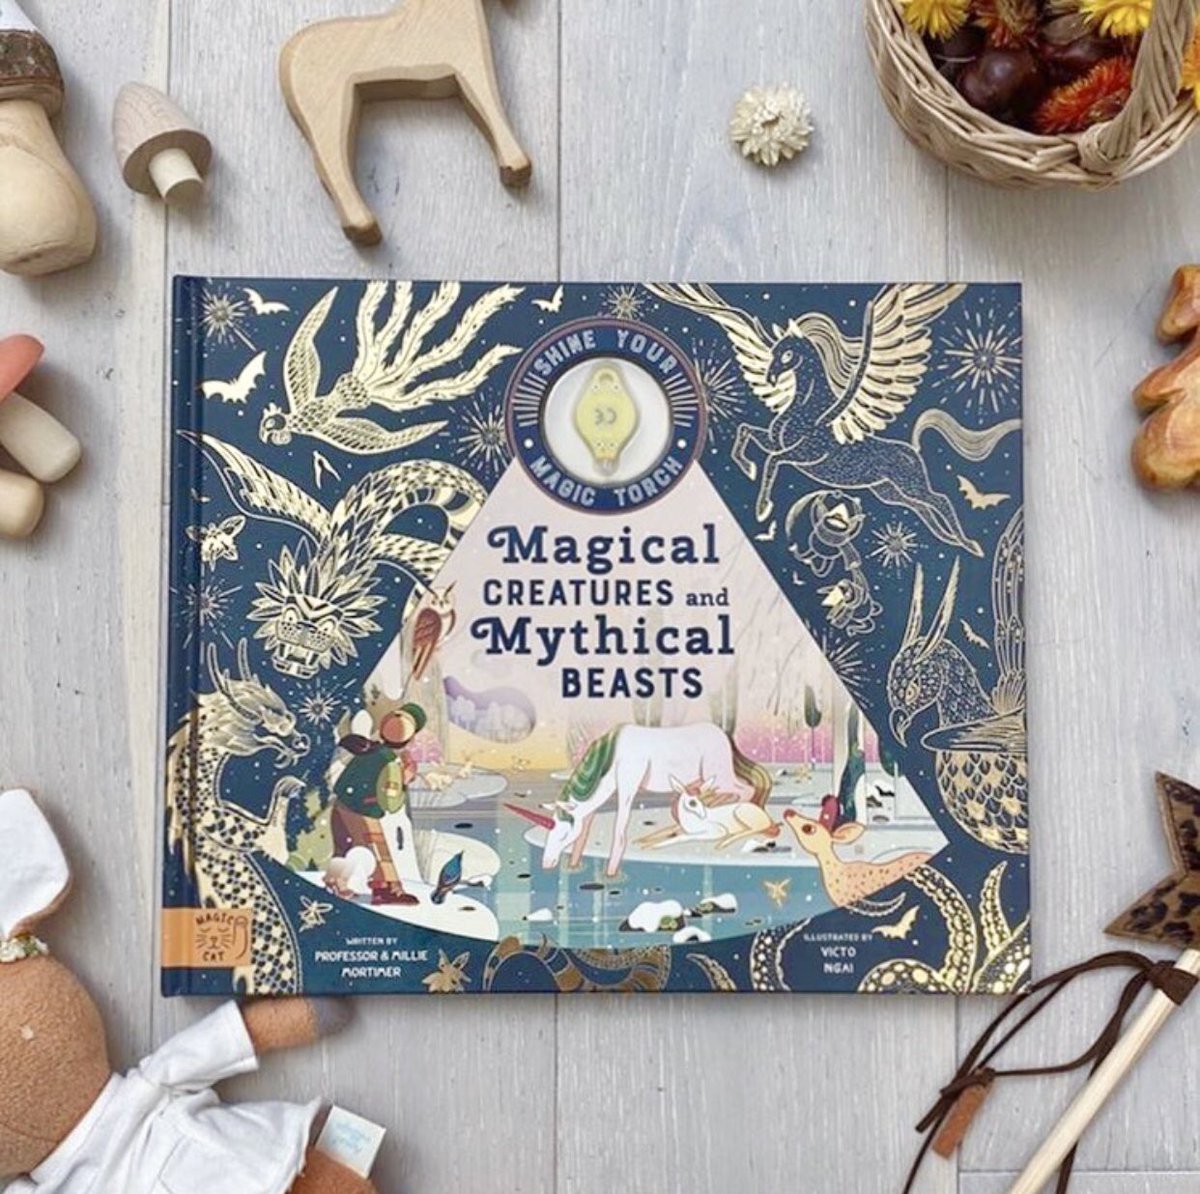 My latest picture book with @magiccatpublishing is coming out in 🇬🇧 on Oct 14th (and in the 🇺🇸 and 🇨🇳 later in the year.) Here’s a beautifully styled photo of the cover by @chloeuberkid 💙 #childrensbook #illustration #victongai #picturebook